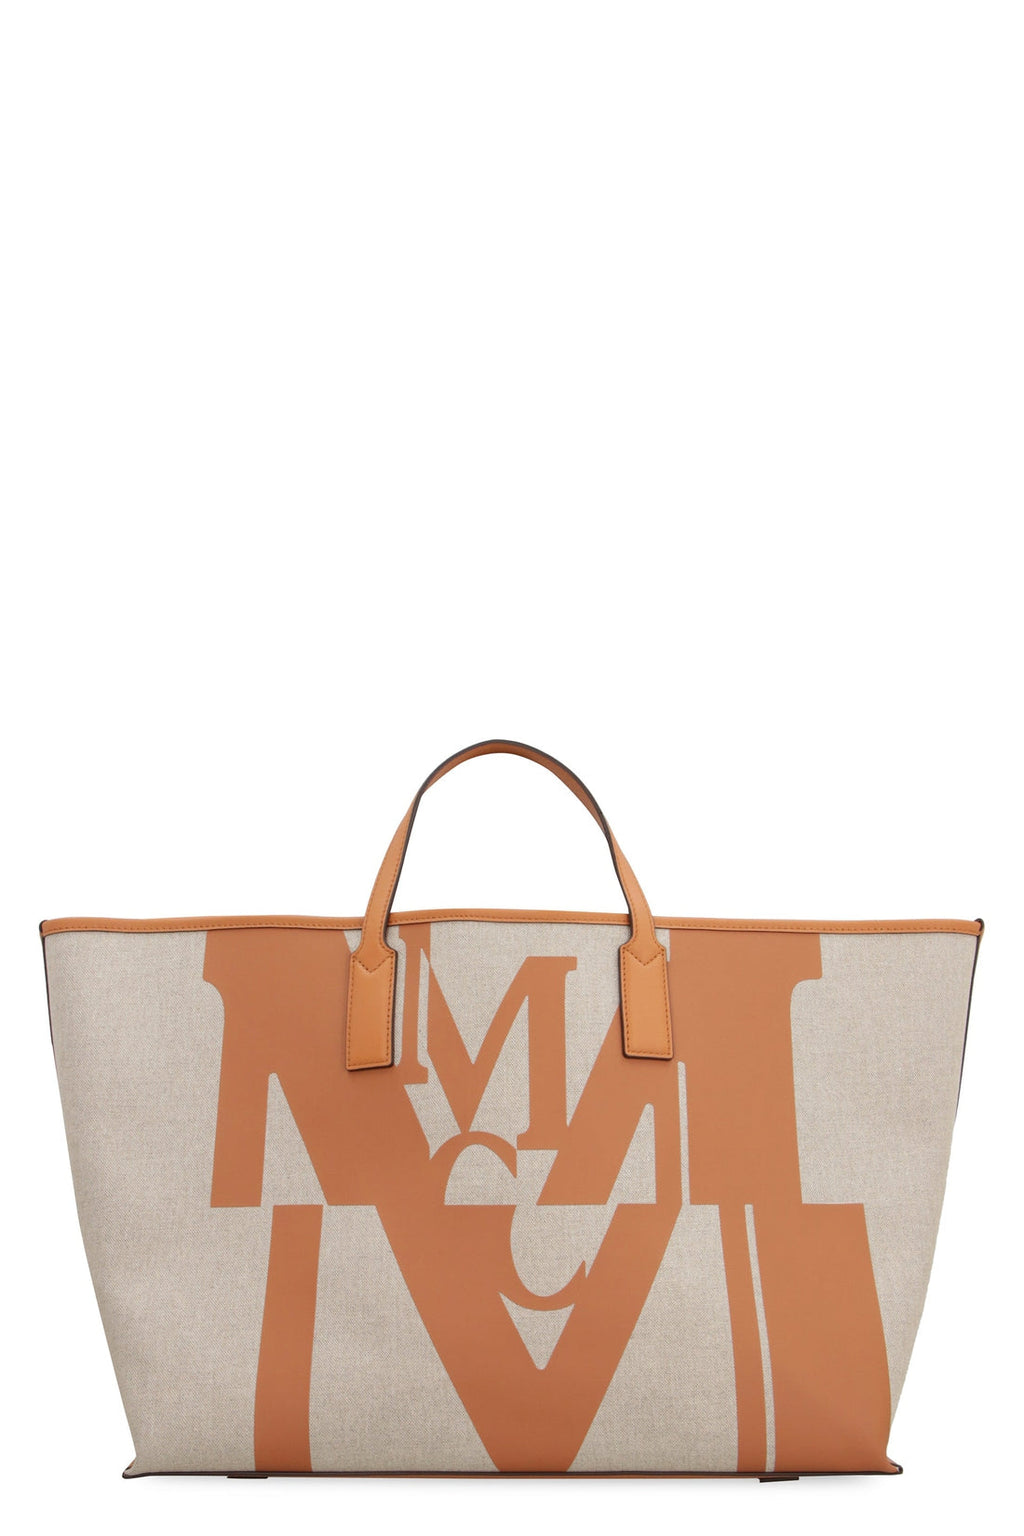 MCM-OUTLET-SALE-Aren canvas and leather shopping bag-ARCHIVIST